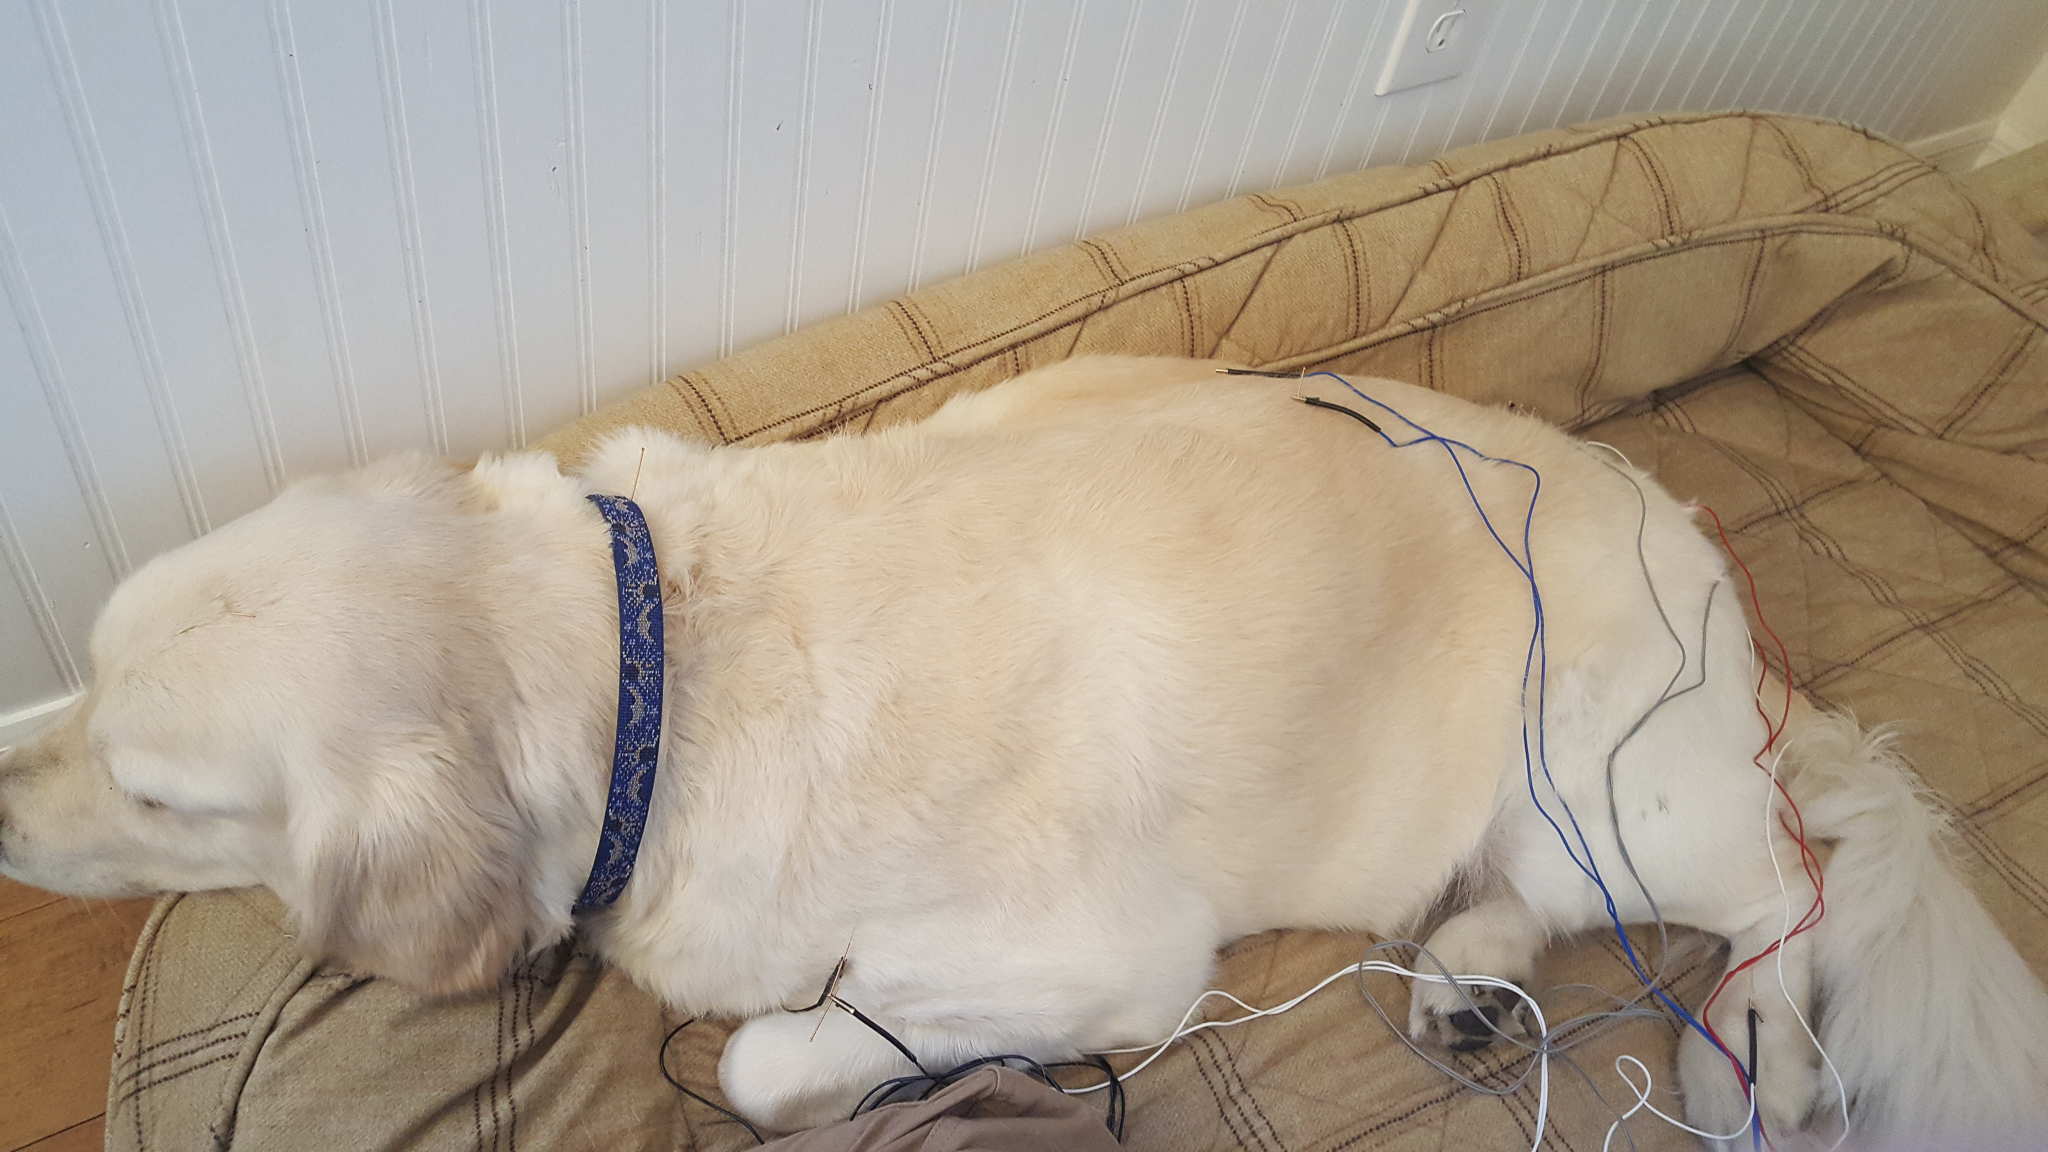 Shaved golden retriever gets electro acupuncture at home in his own bed